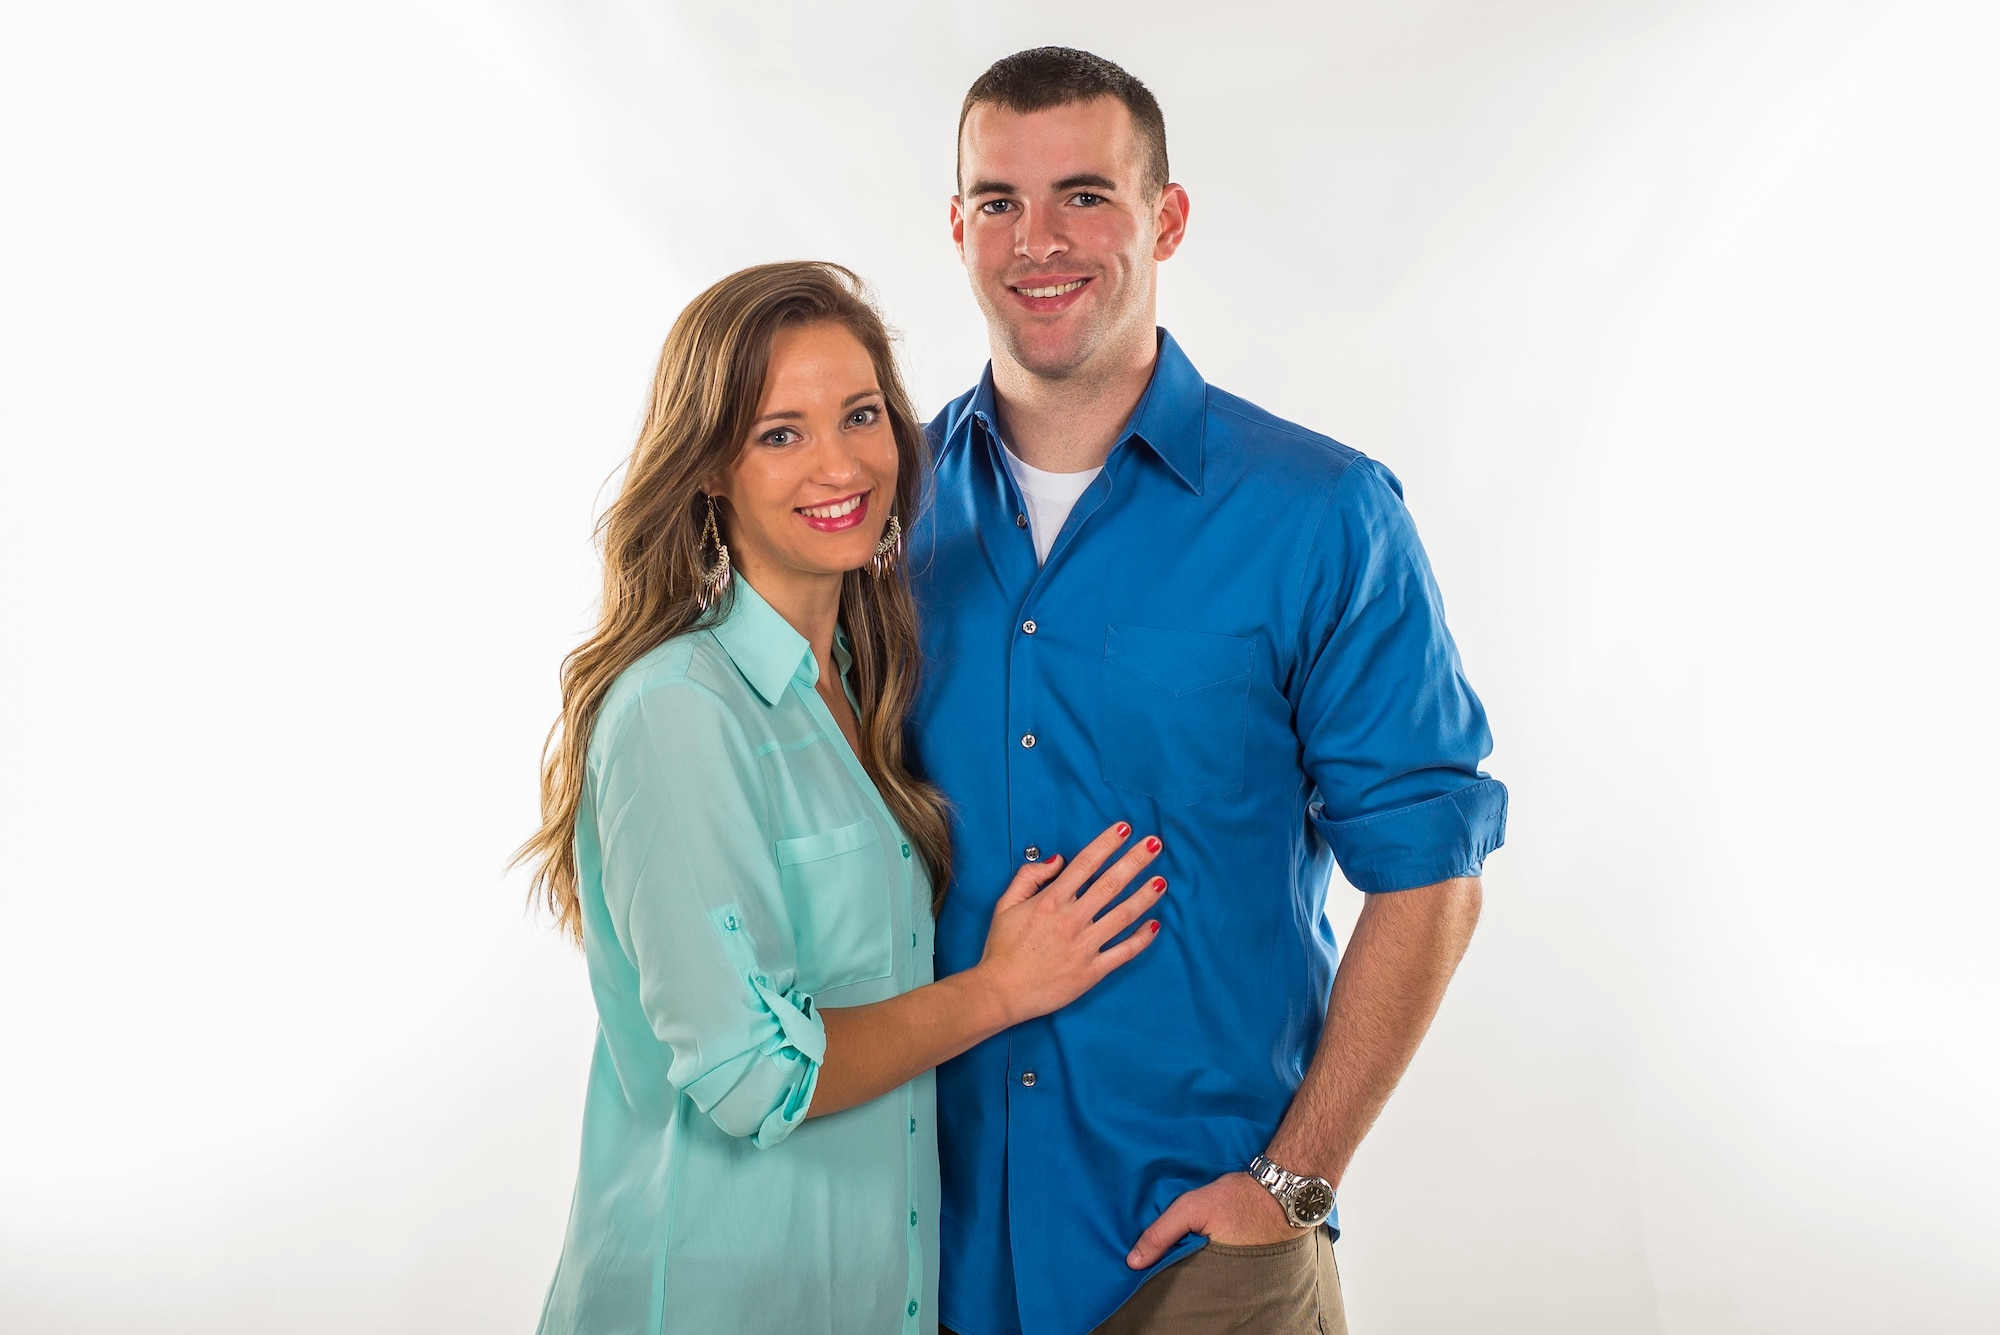 Airman 1st Class Daniel Pippen, a fireman with 628th Civil Engineer Squadron Fire Department at Joint Base Charleston, S.C., and his girlfriend, Becky Atkins, a registered nurse at East Cooper Medical Center in Mount Pleasant, S.C., saved the life of a young girl on March 9, 2015, after an afternoon on the beach on Sullivan's Island. (U.S. Air Force photo/Senior Airman George Goslin)